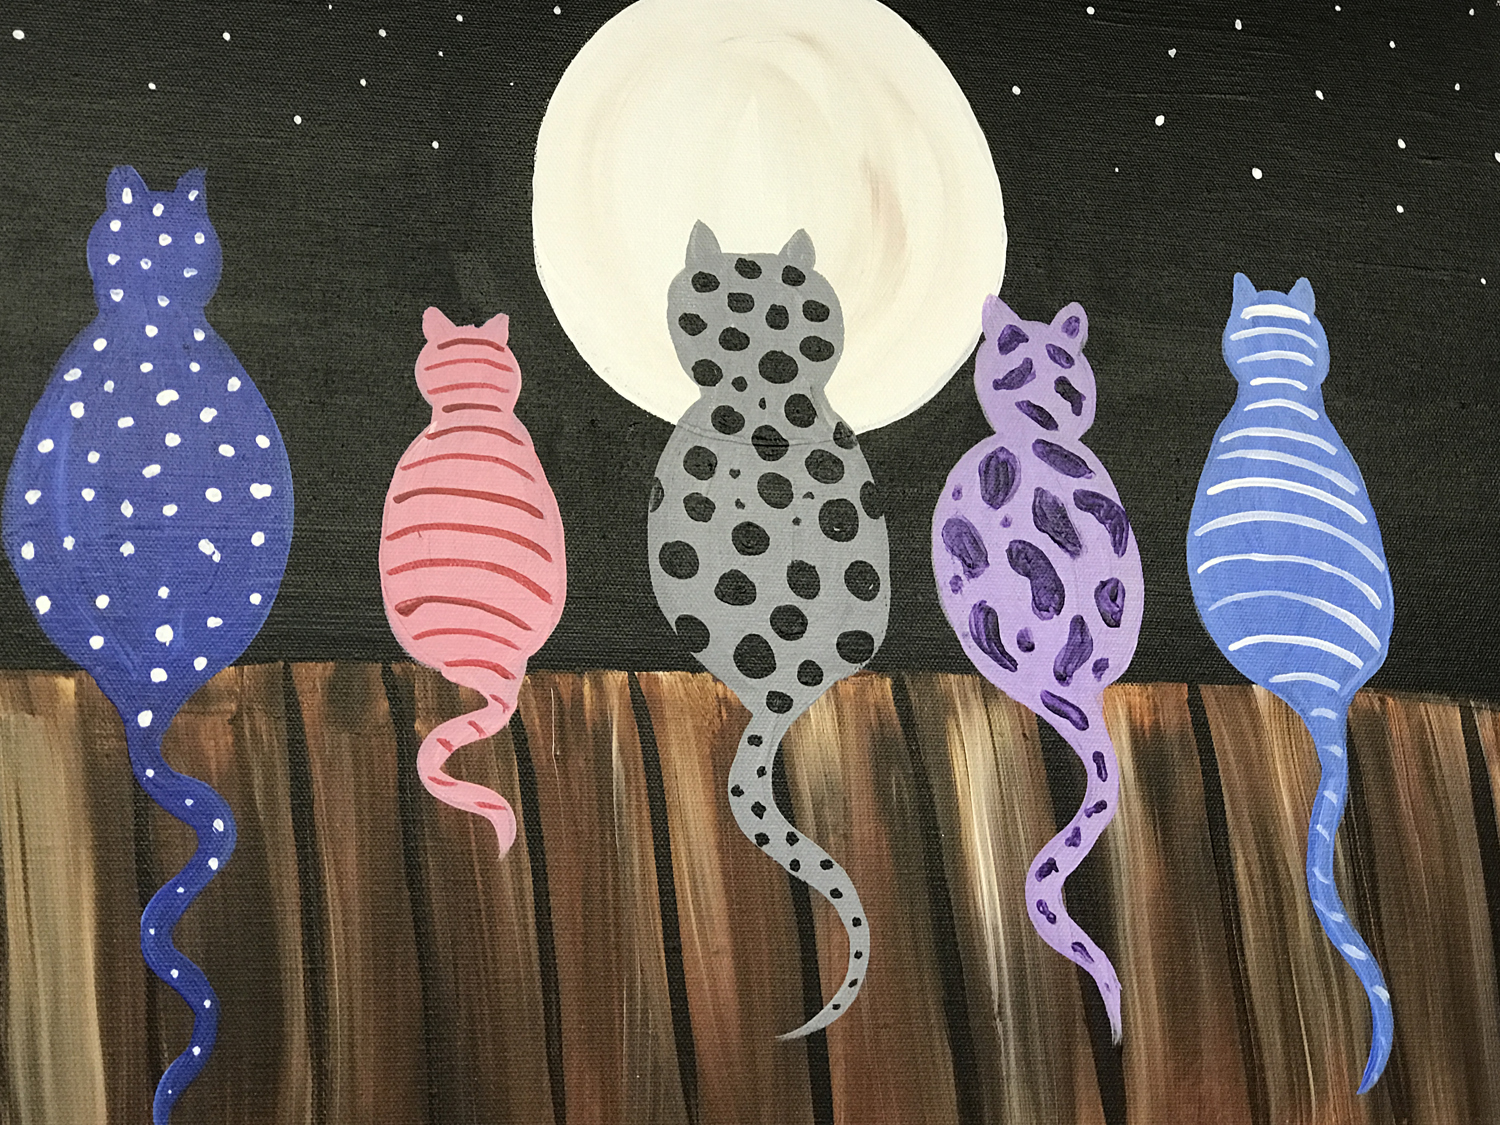 In Studio Creative Kids – Cats on a Fence